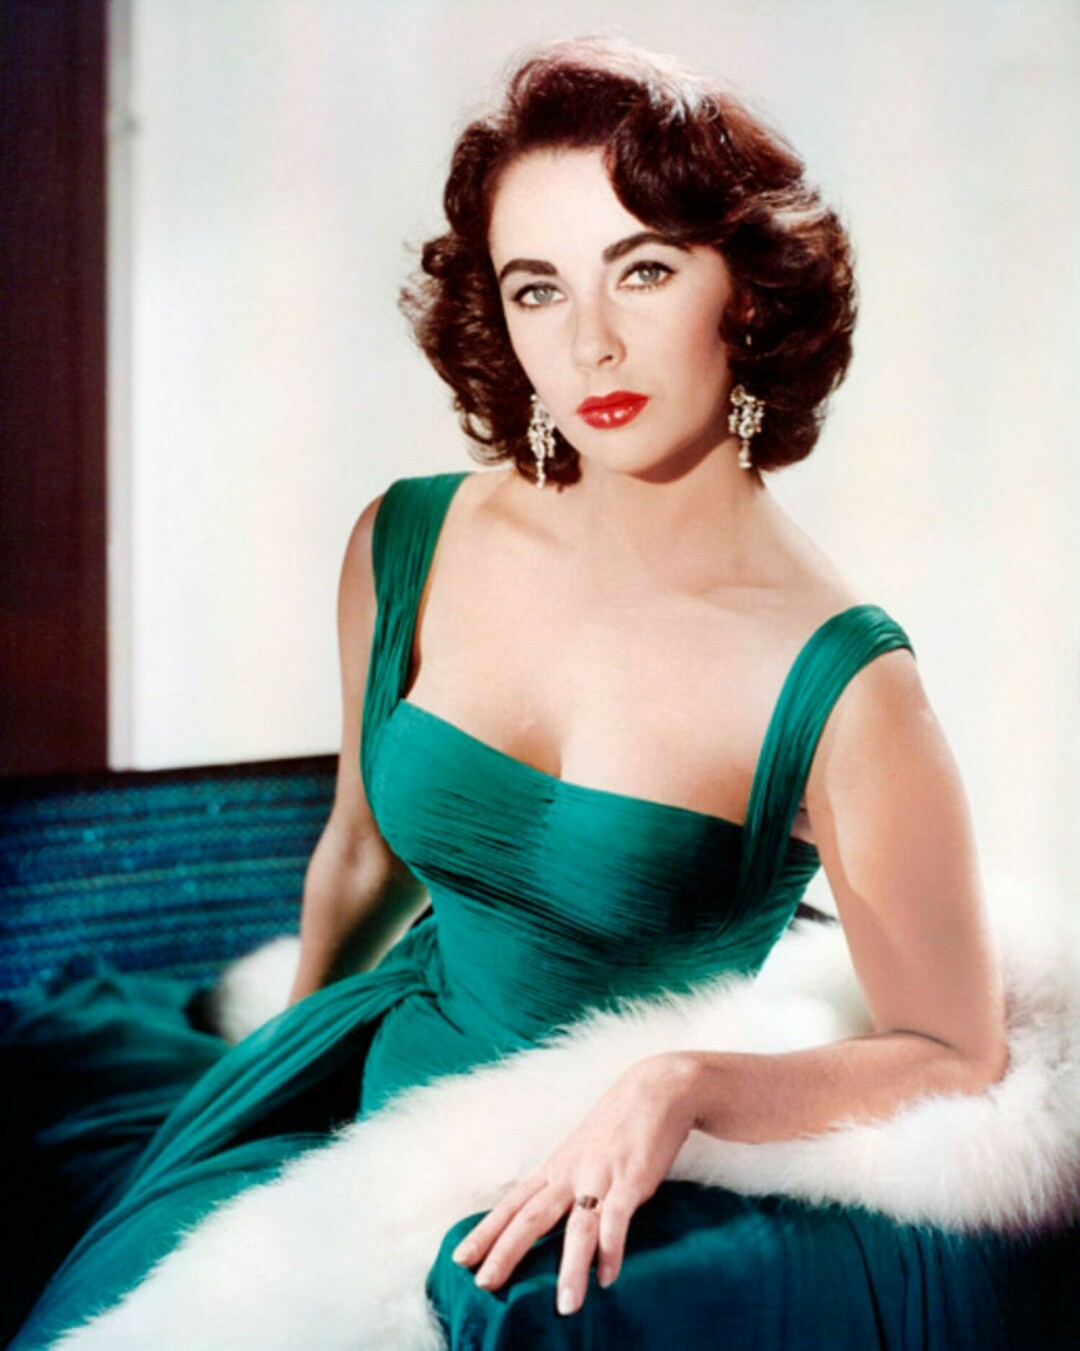 Elizabeth Taylor, a Hollywood movie star from the '40s and '50s, was known as one of MGM Studio's 